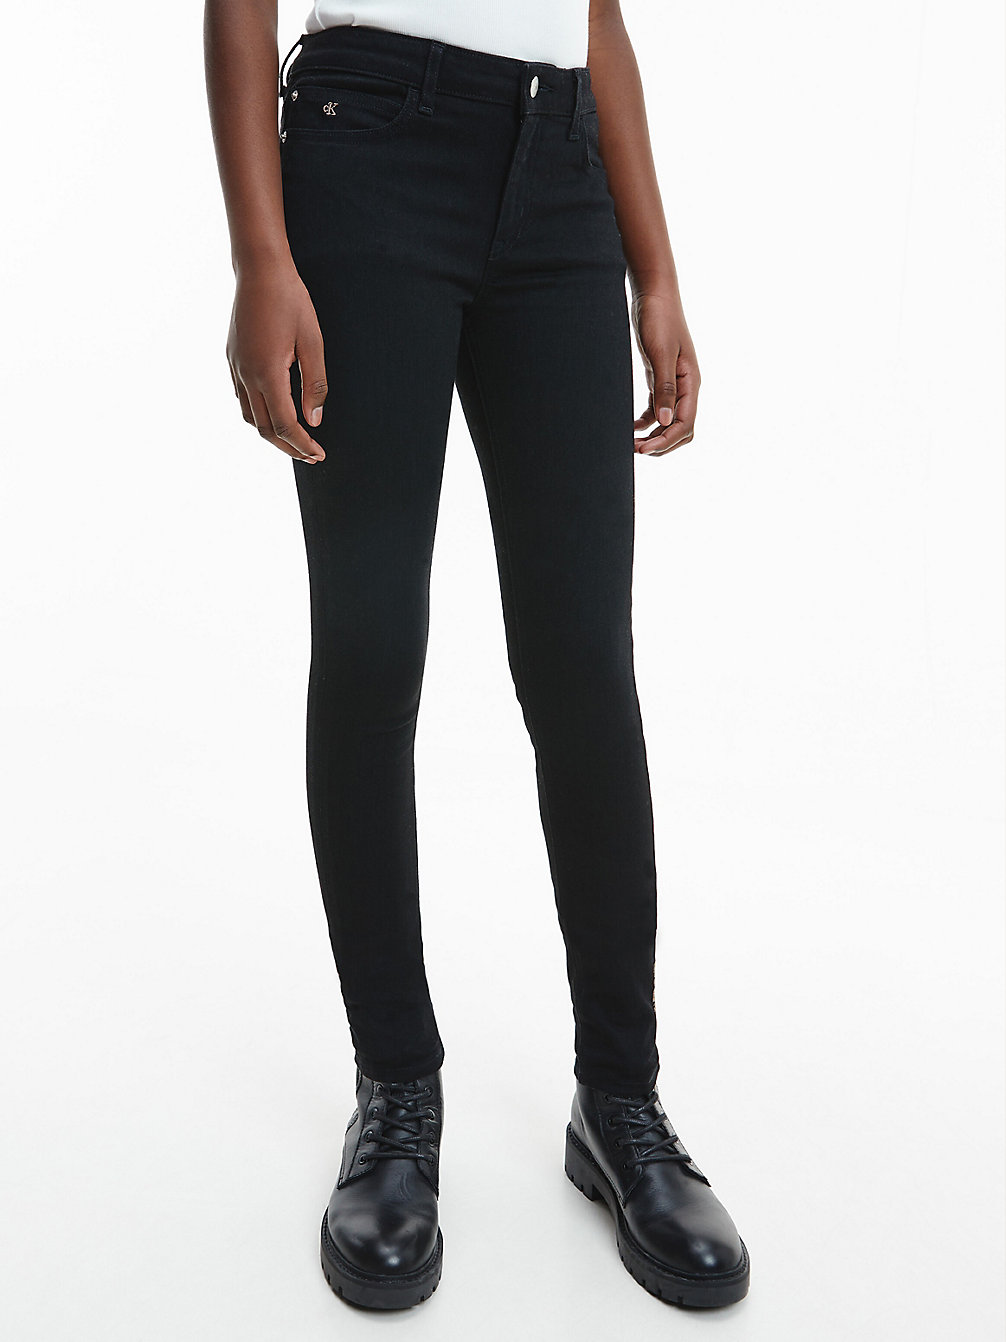 CLEAN BLACK STRETCH > Mid Rise Skinny Jeans > undefined Maedchen - Calvin Klein